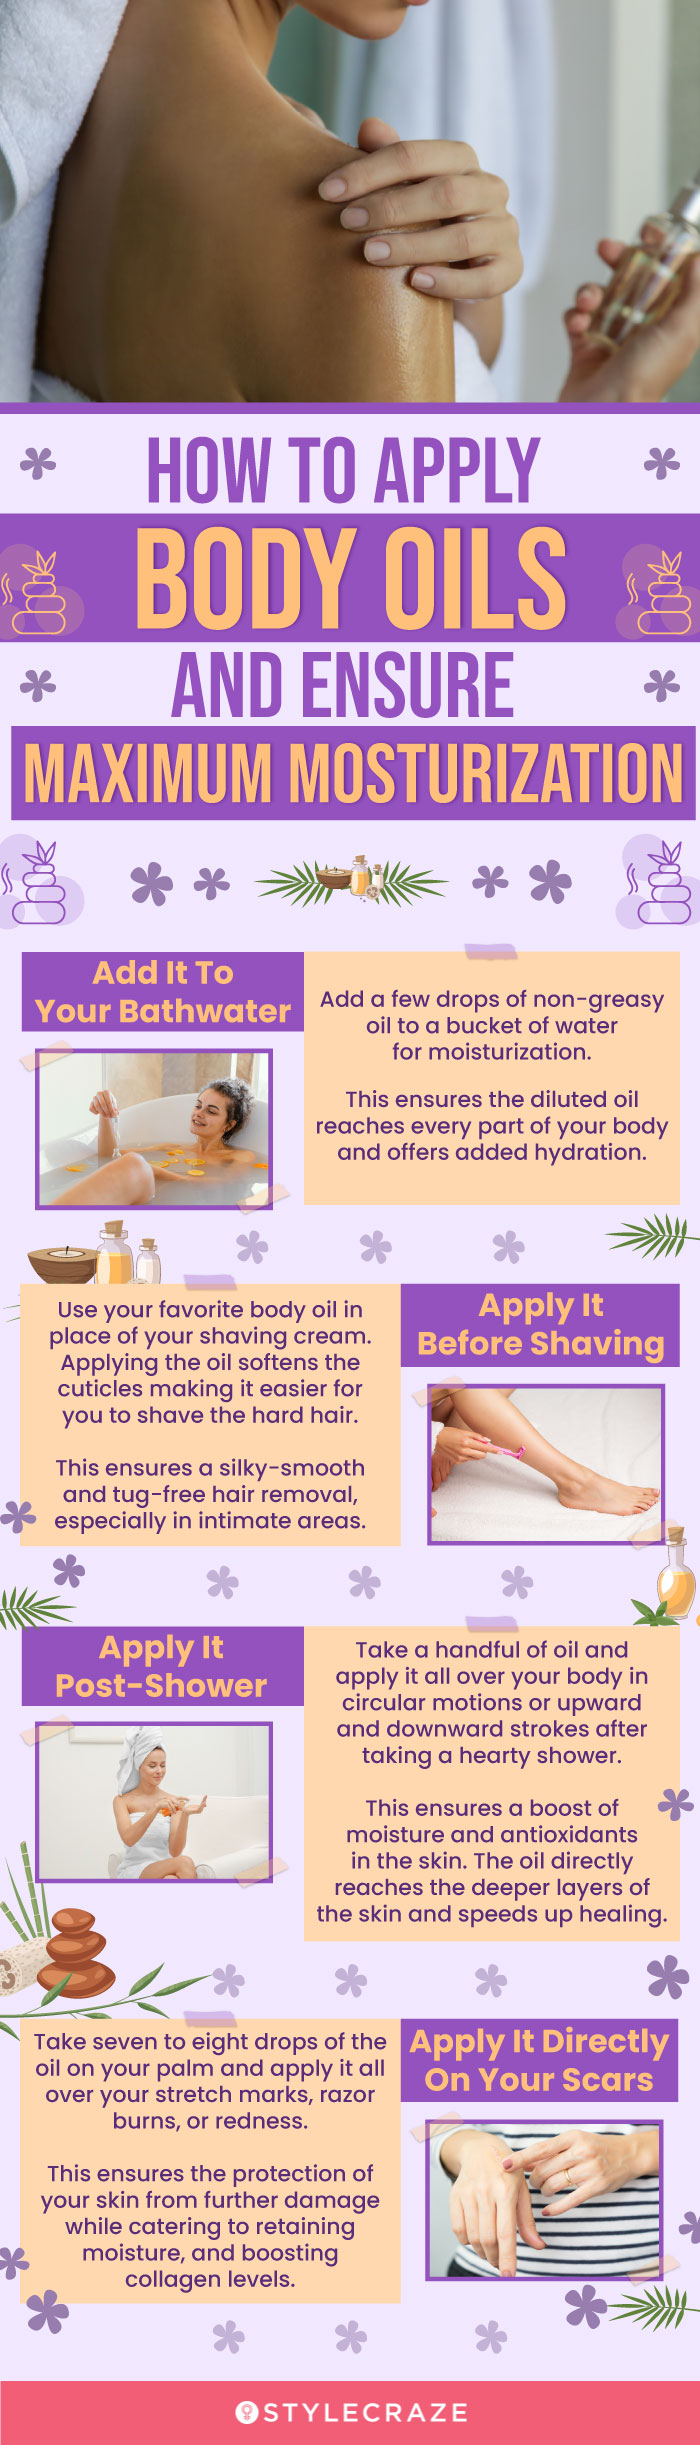 How To Apply Body Oils And Ensure Maximum Moisturization [infographic]